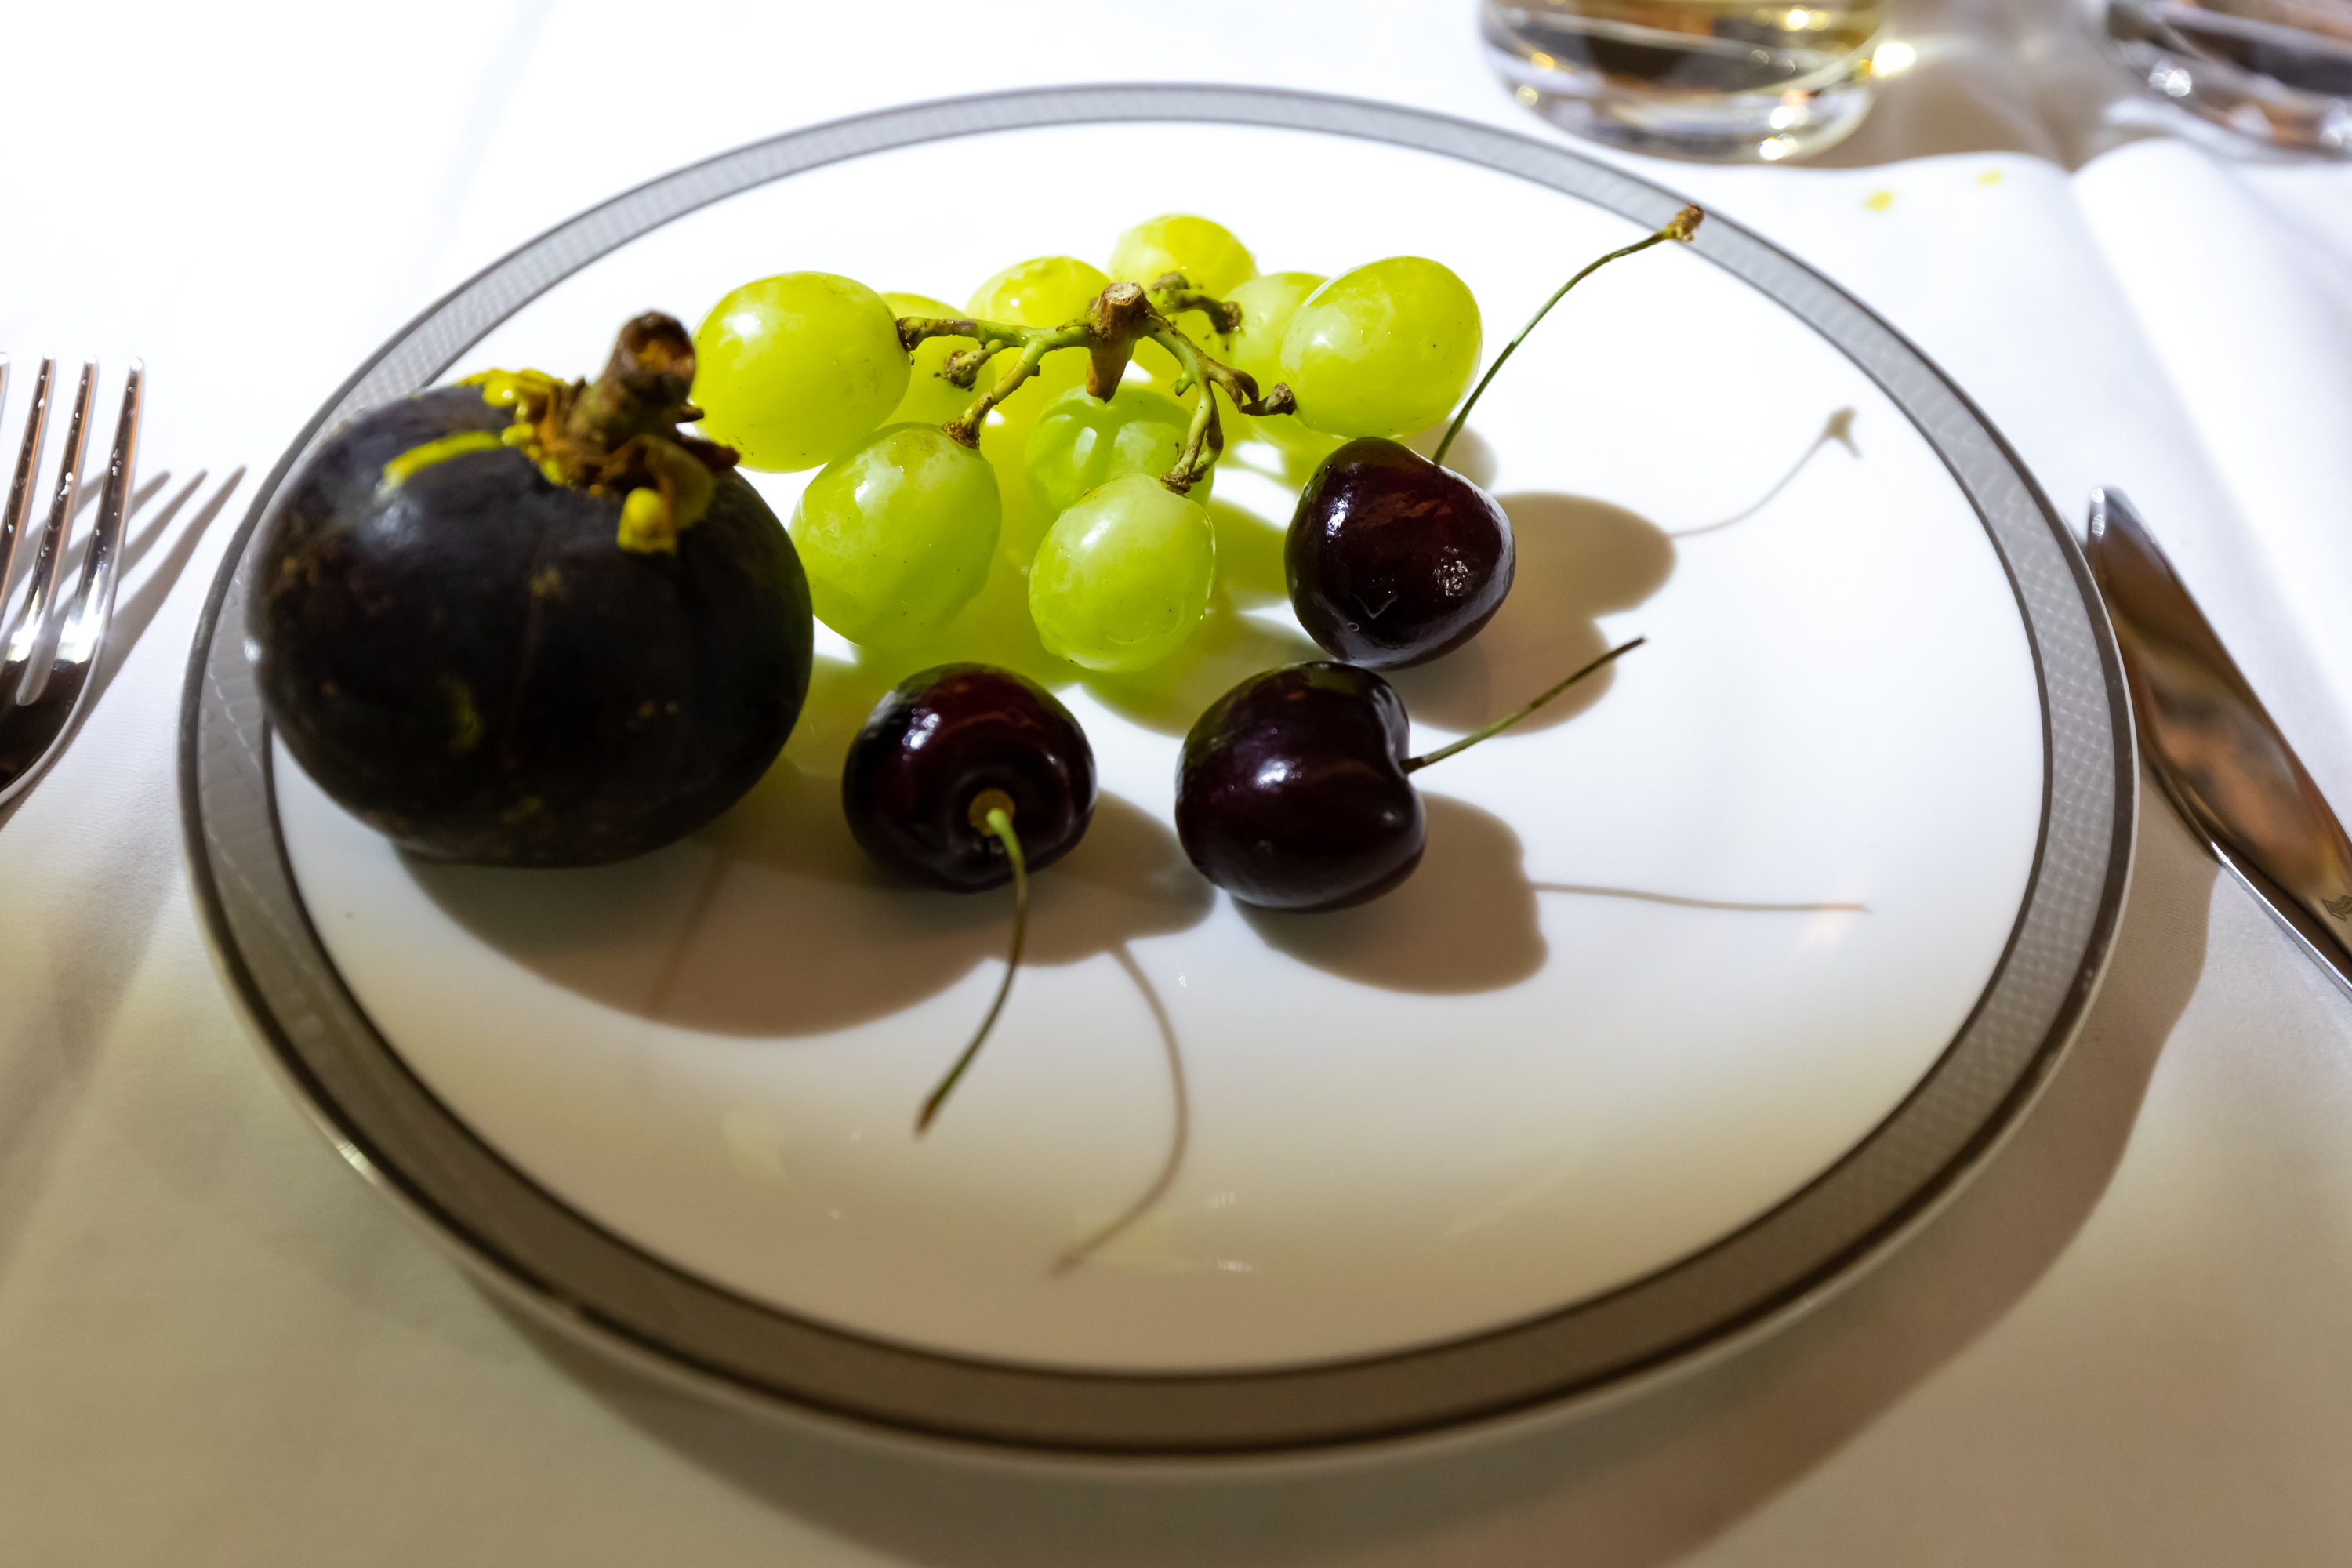 a plate of grapes and cherries